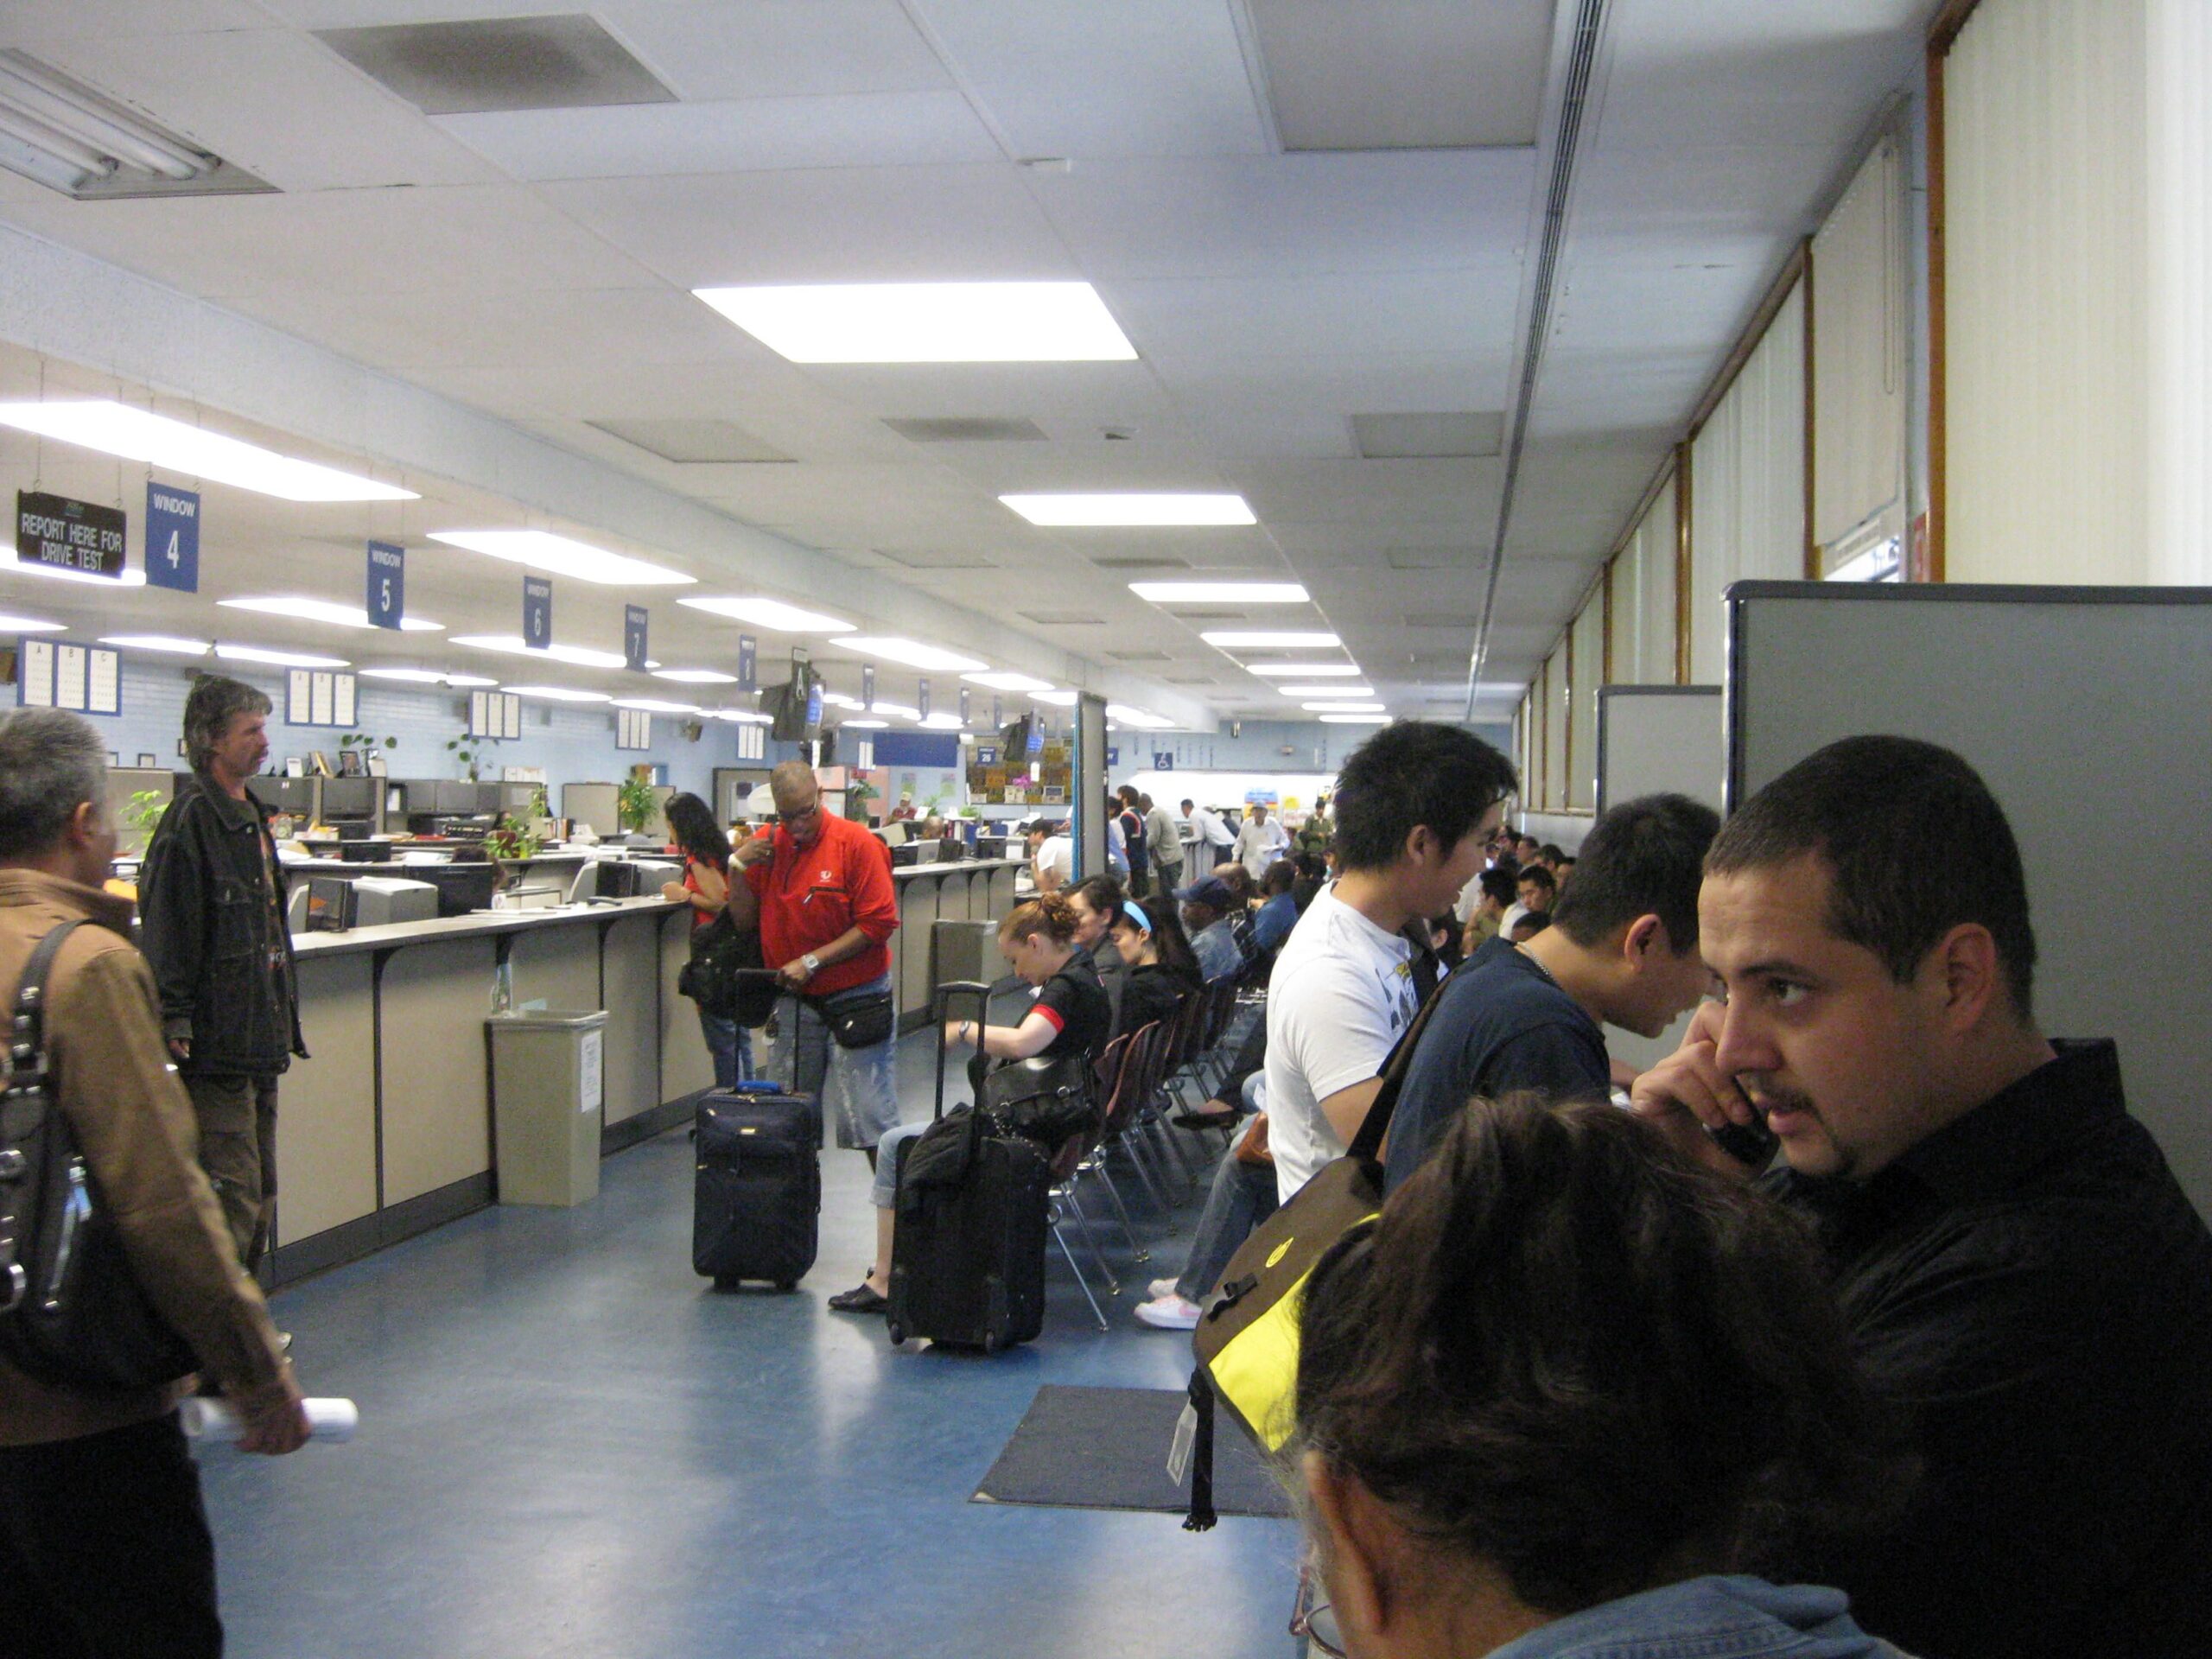 Patrons wait for service at the DMV